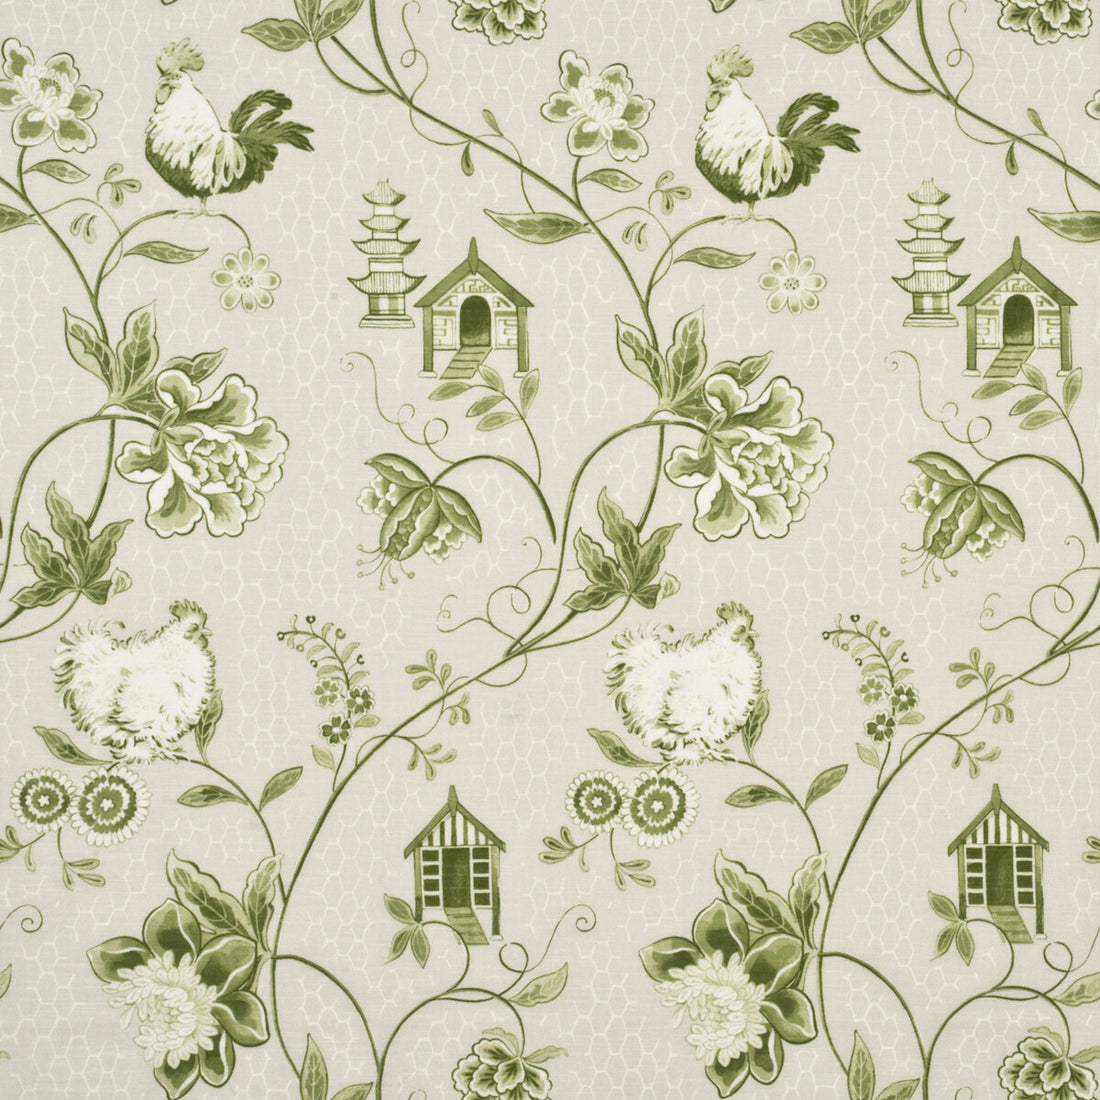 Bantam Toile fabric in green color - pattern PP50341.4.0 - by Baker Lifestyle in the Opera Garden collection